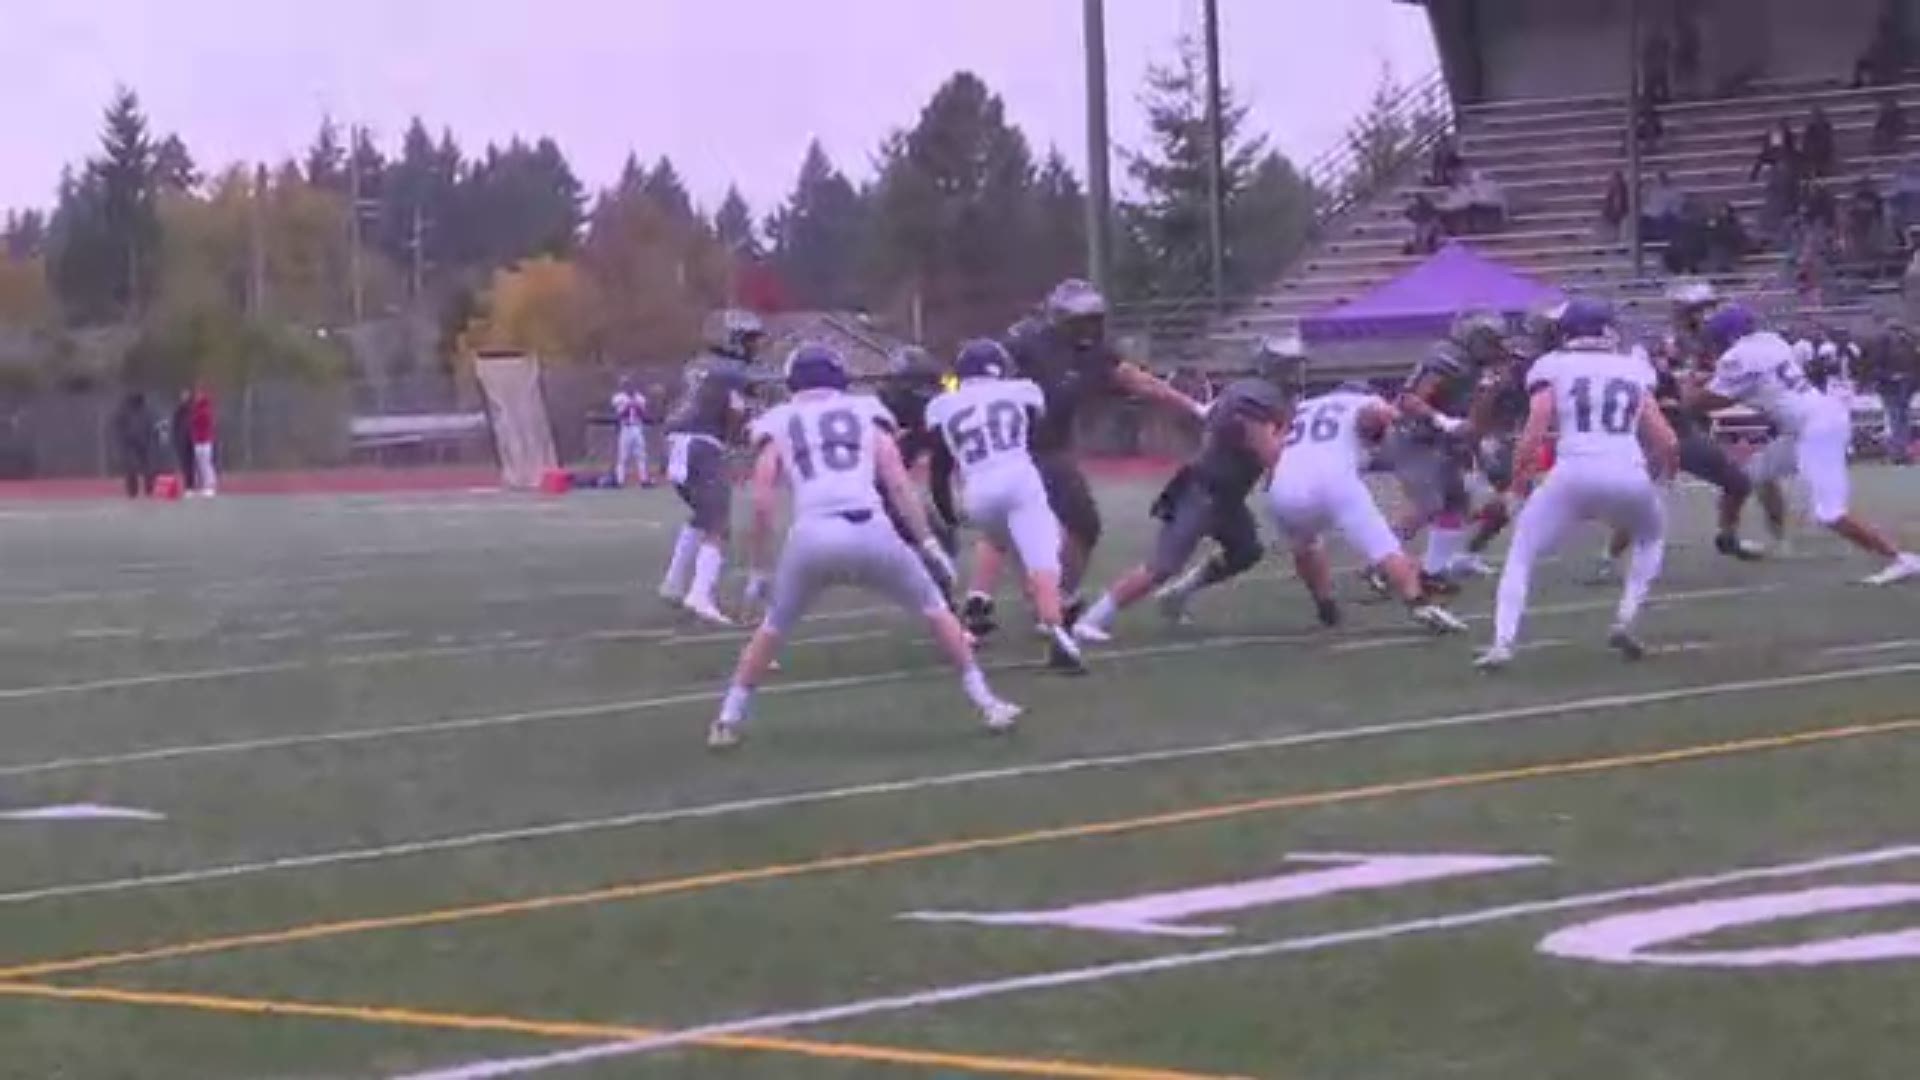 Highlights of Union's 56-7 win over Heritage. Highlights are part of KGW's Friday Night Flights with Orlando Sanchez.